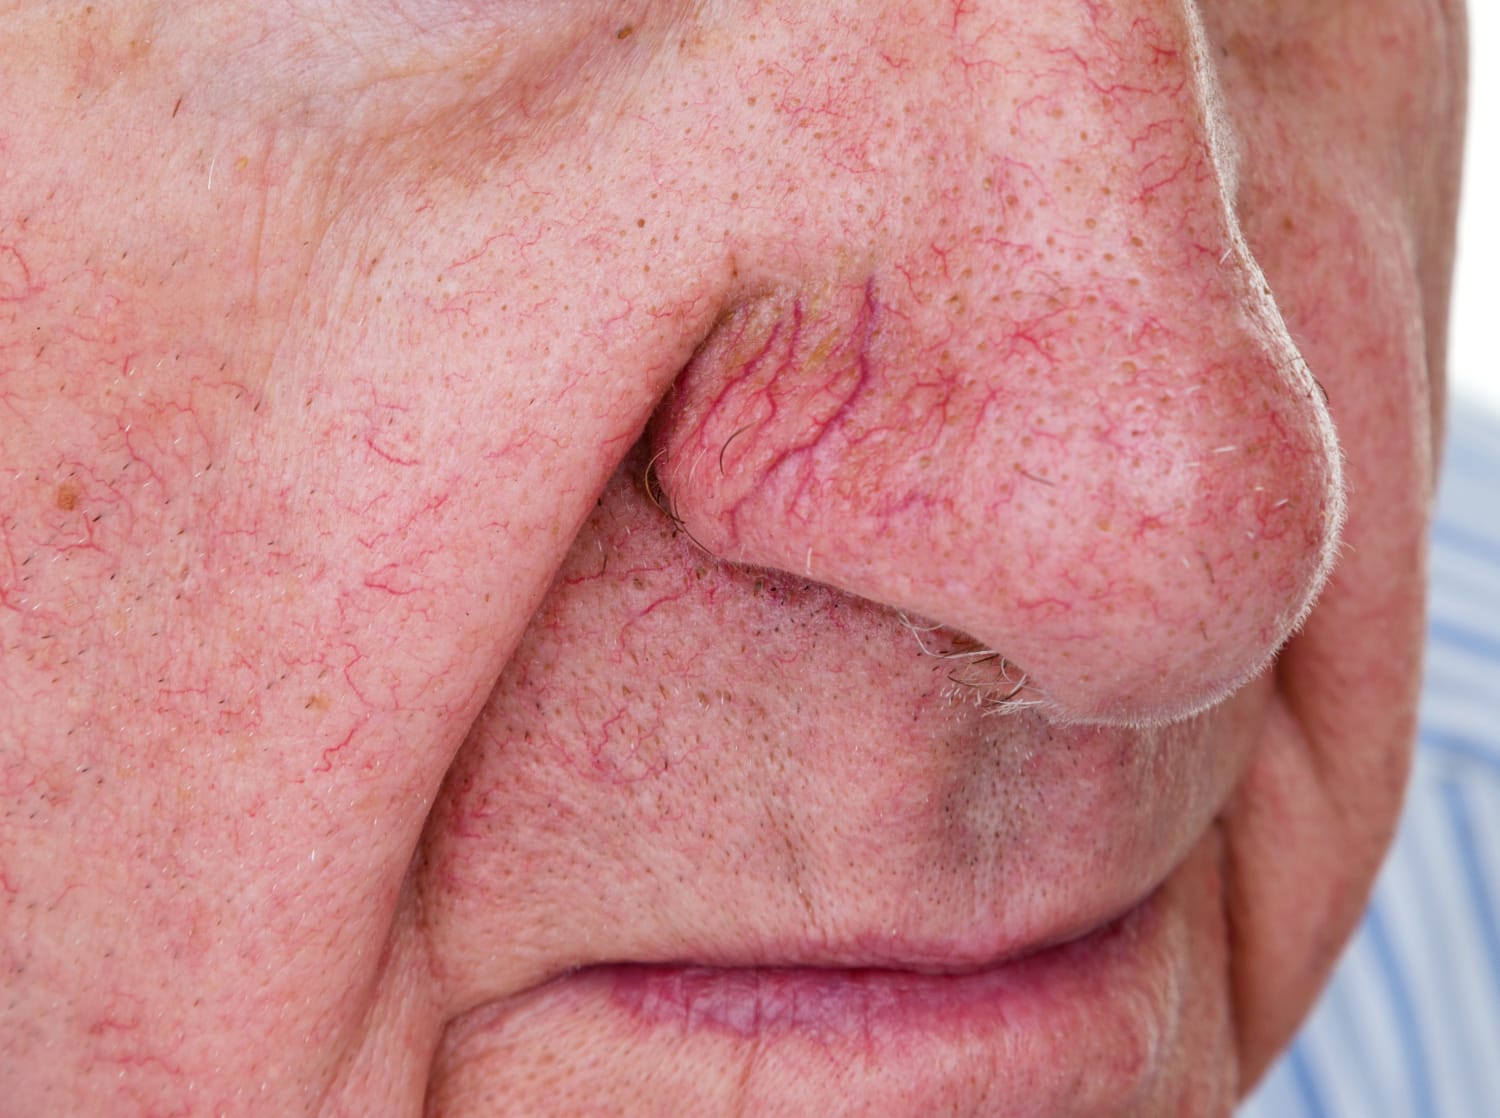 How Can I Get Rid of the Spider Veins on My Face?